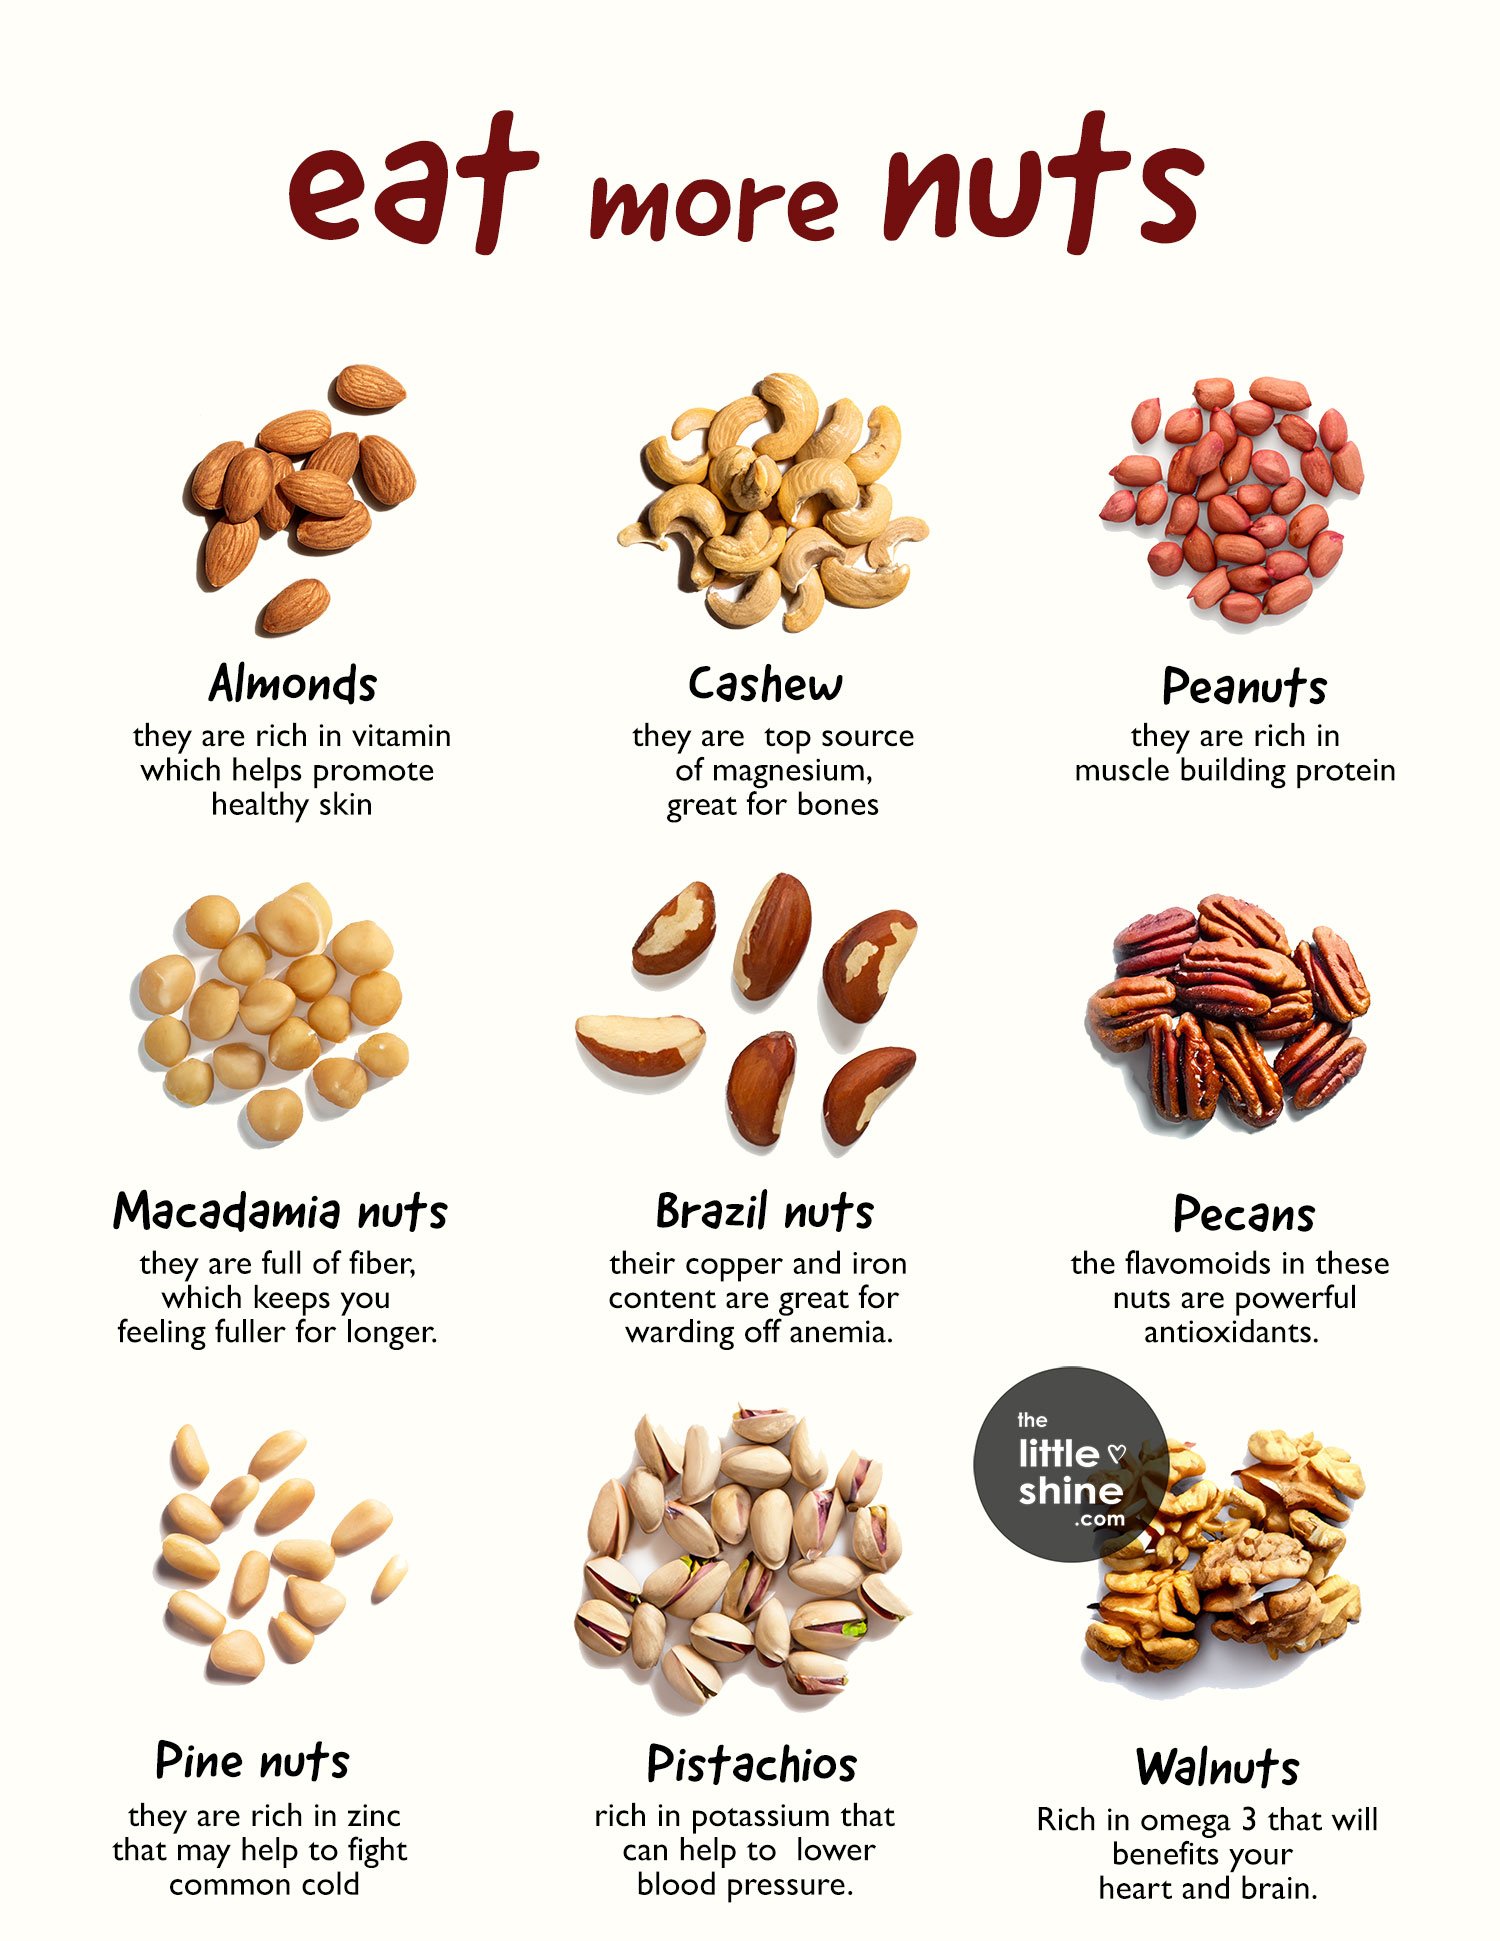 Eat more nuts - benefits and uses of different types of nuts